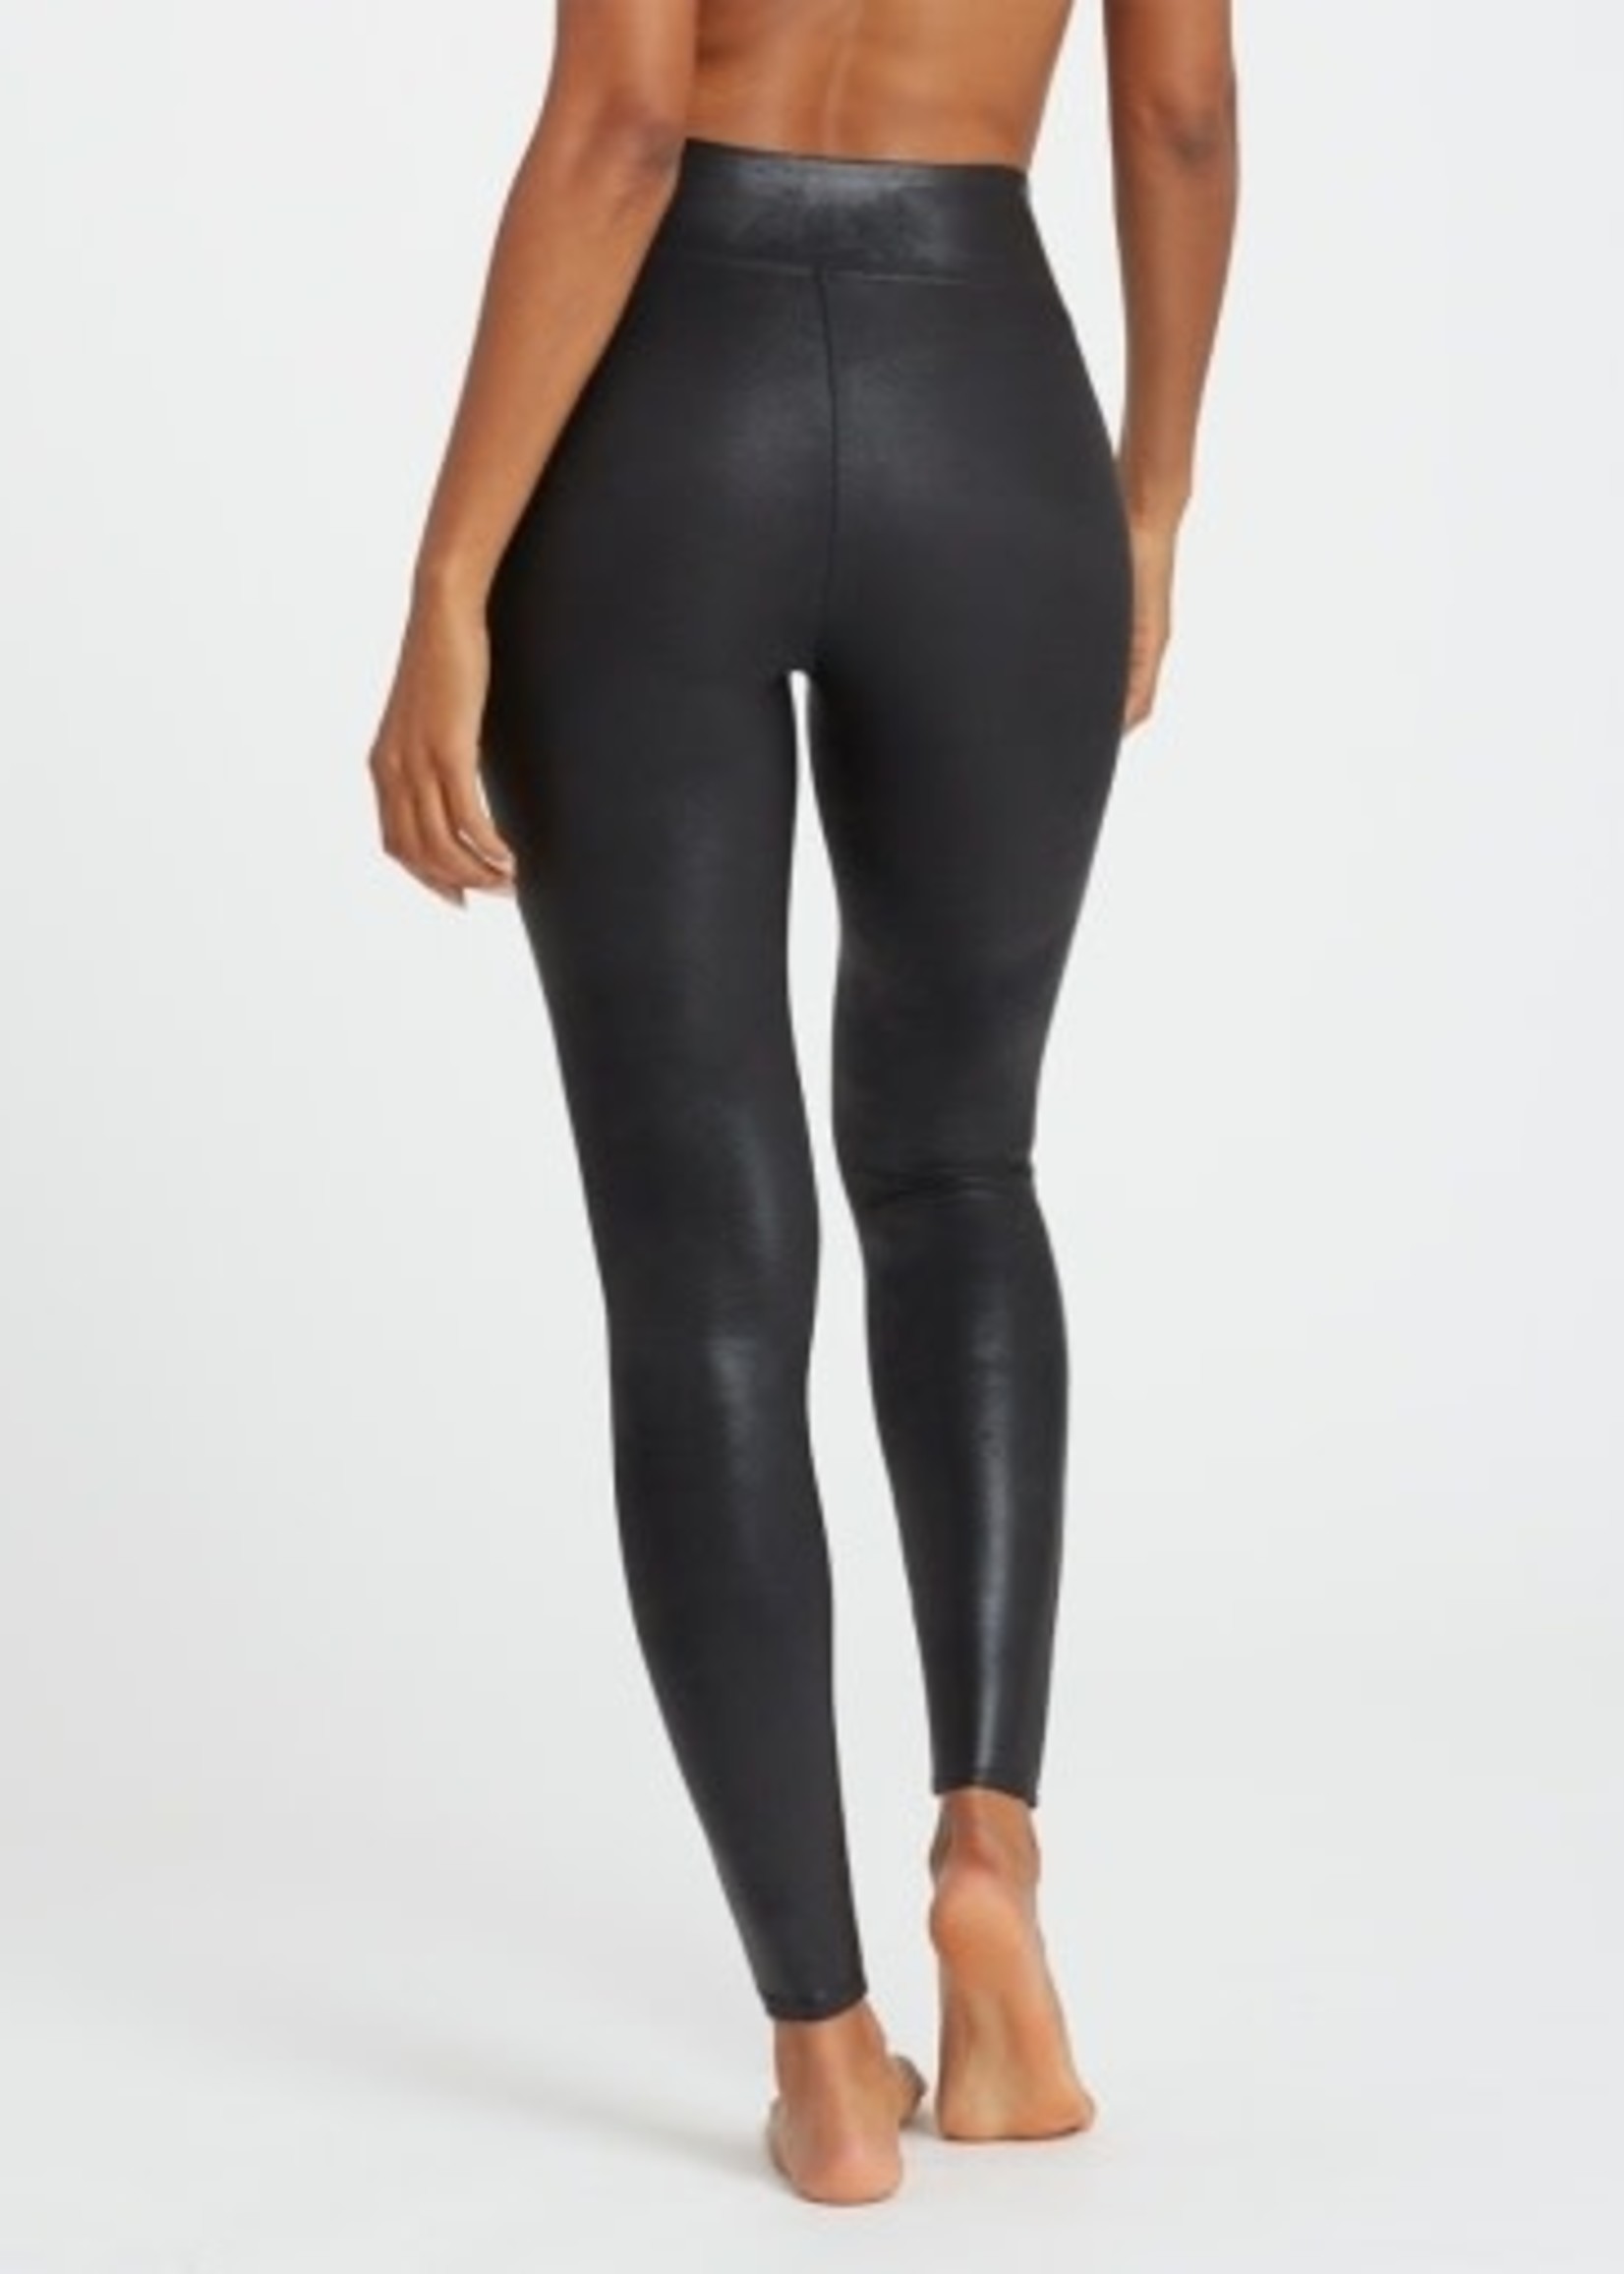 SPANX - It's FINALLY here: Faux Leather Leggings in patent leather! The  high-shine faux patent leather legging is a new take on your favorite  leggings. Available in petite, regular and tall inseams.